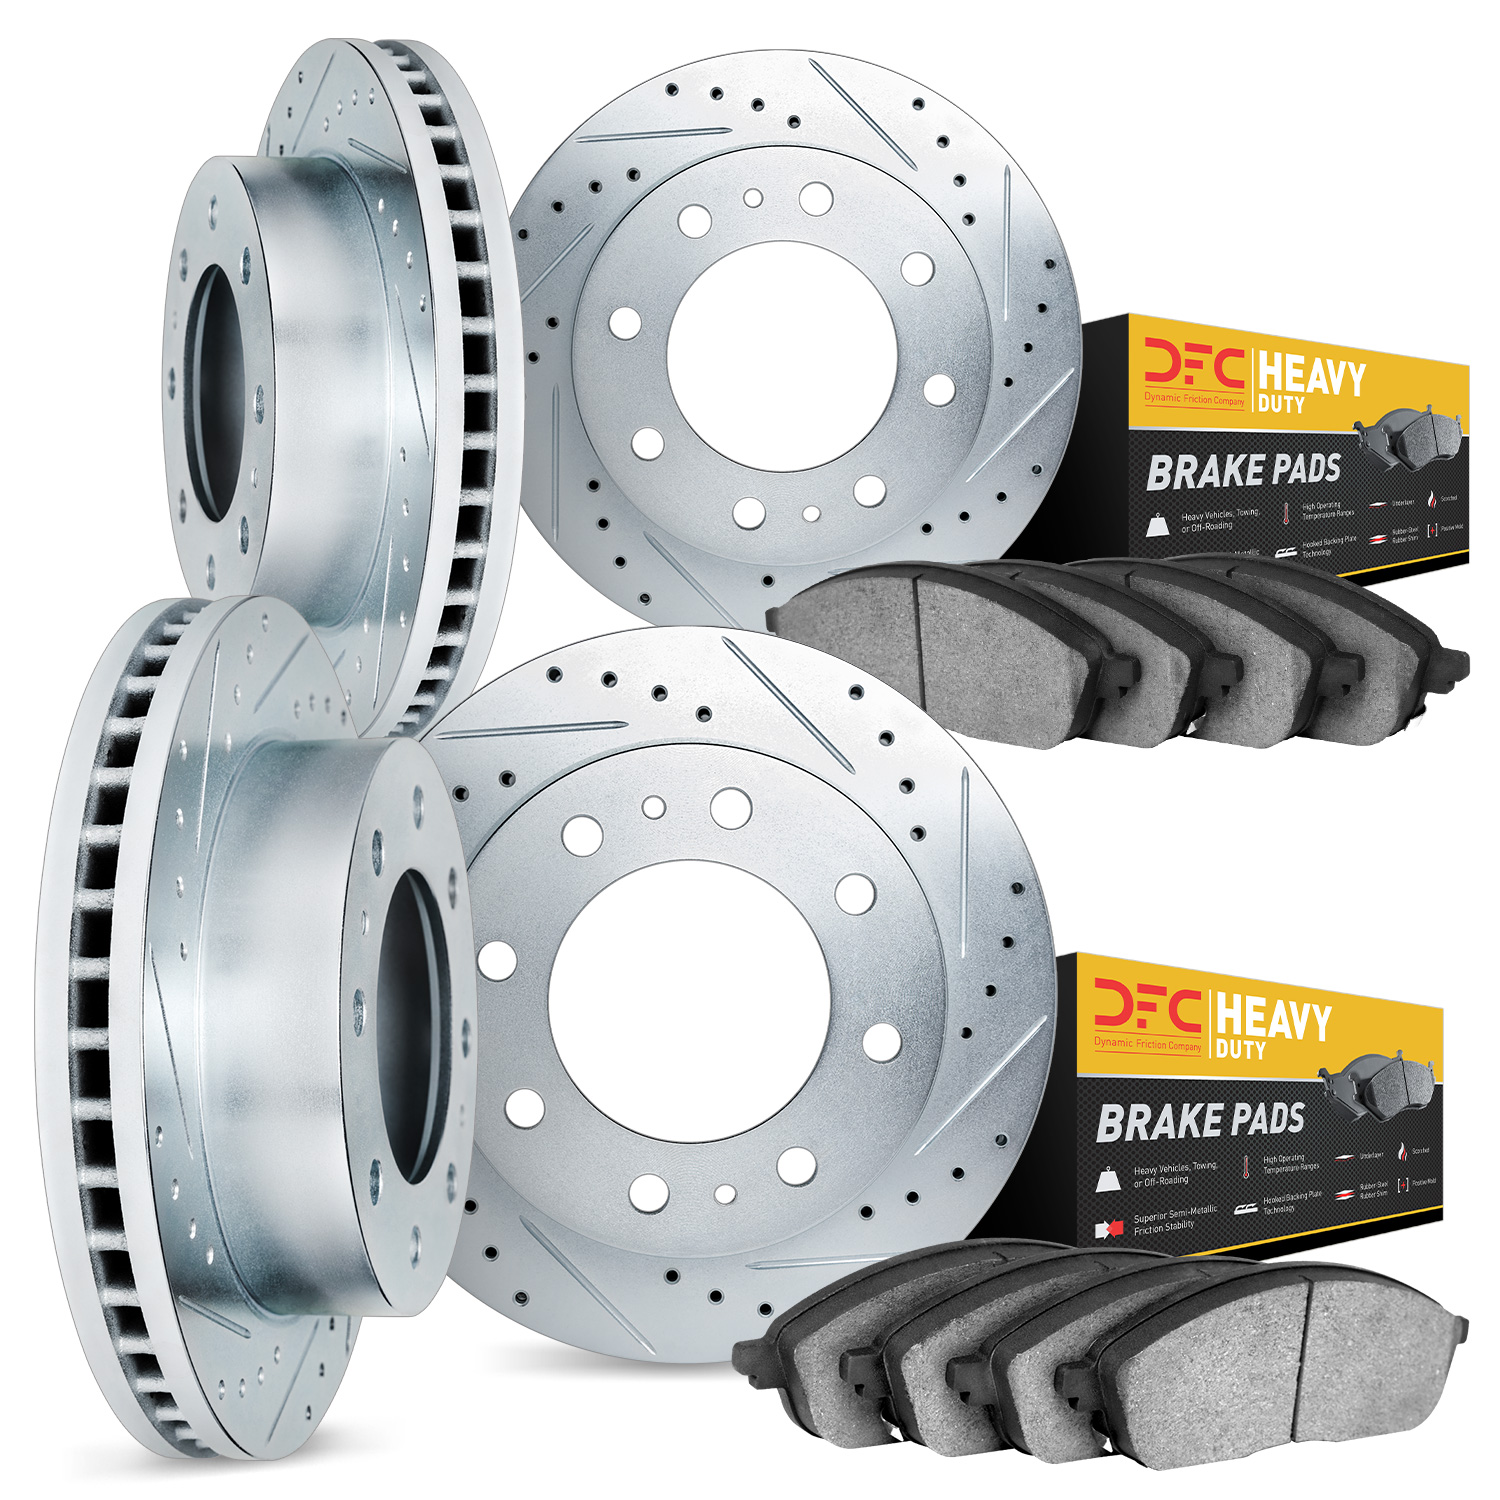 7204-99088 Drilled/Slotted Rotors w/Heavy-Duty Brake Pads Kit [Silver], 2005-2010 Ford/Lincoln/Mercury/Mazda, Position: Front an